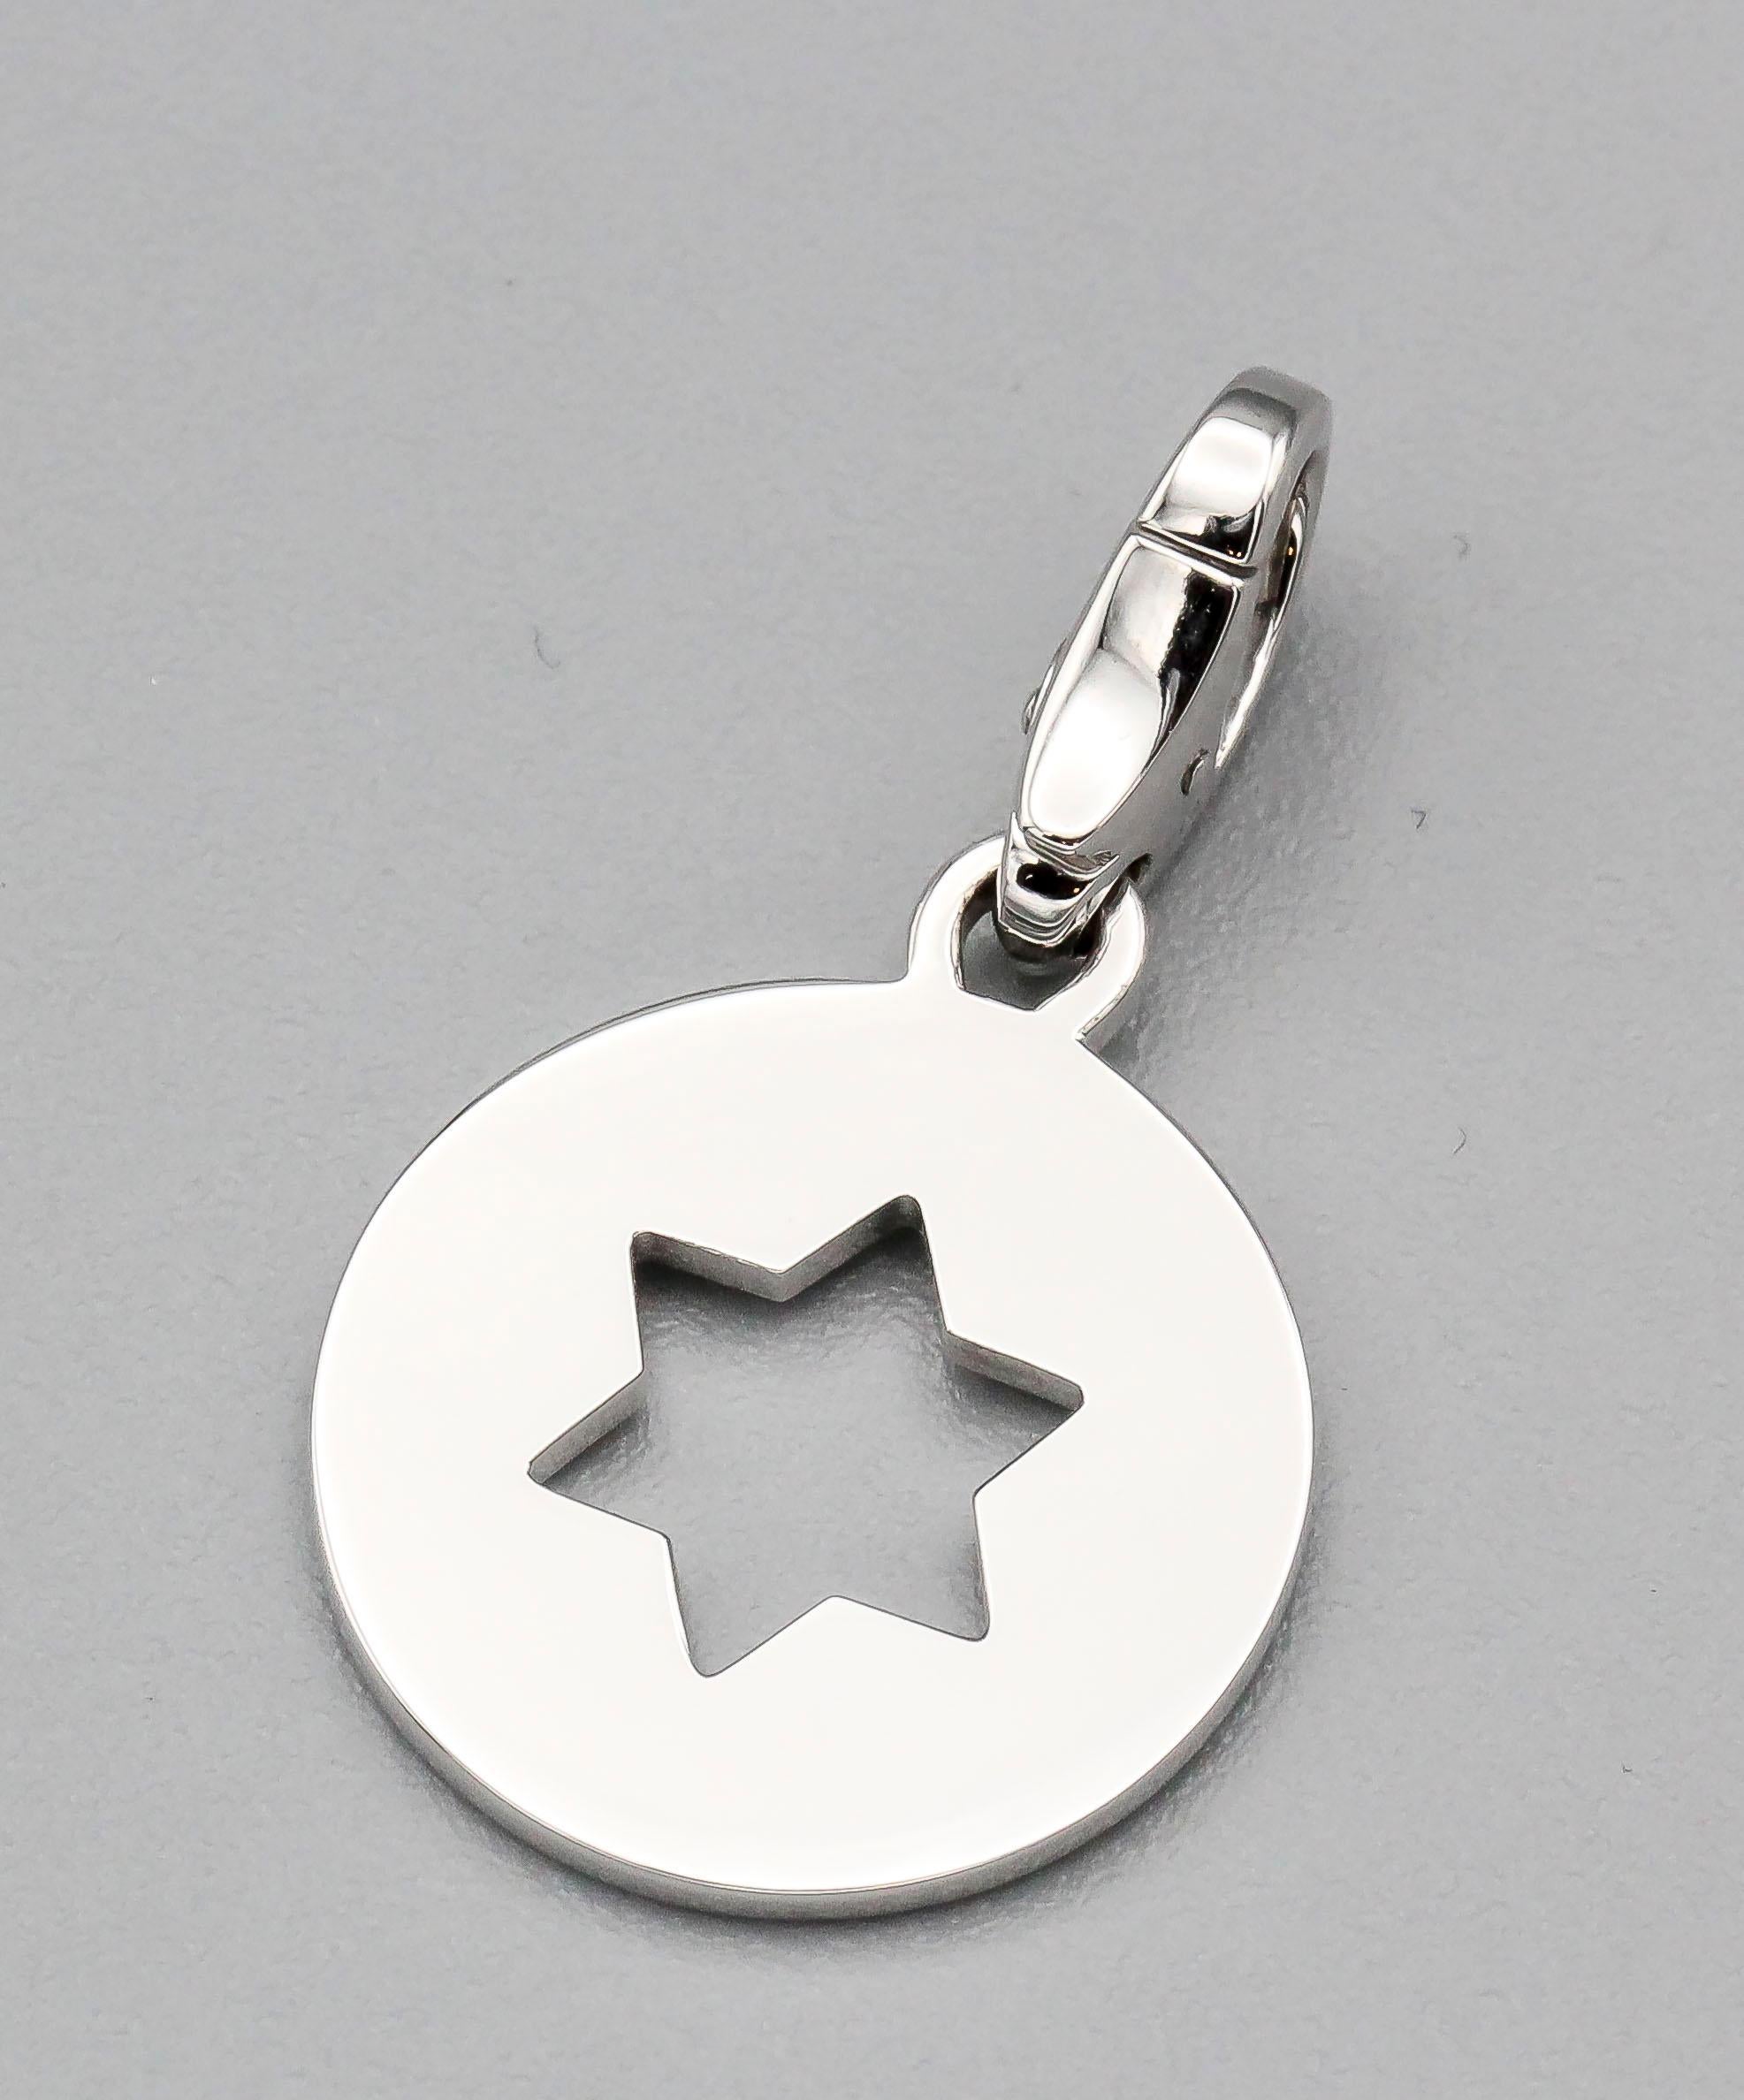 Fine 18k white gold Star of David charm by Cartier.

Hallmarks: Cartier, 750, reference numbers.